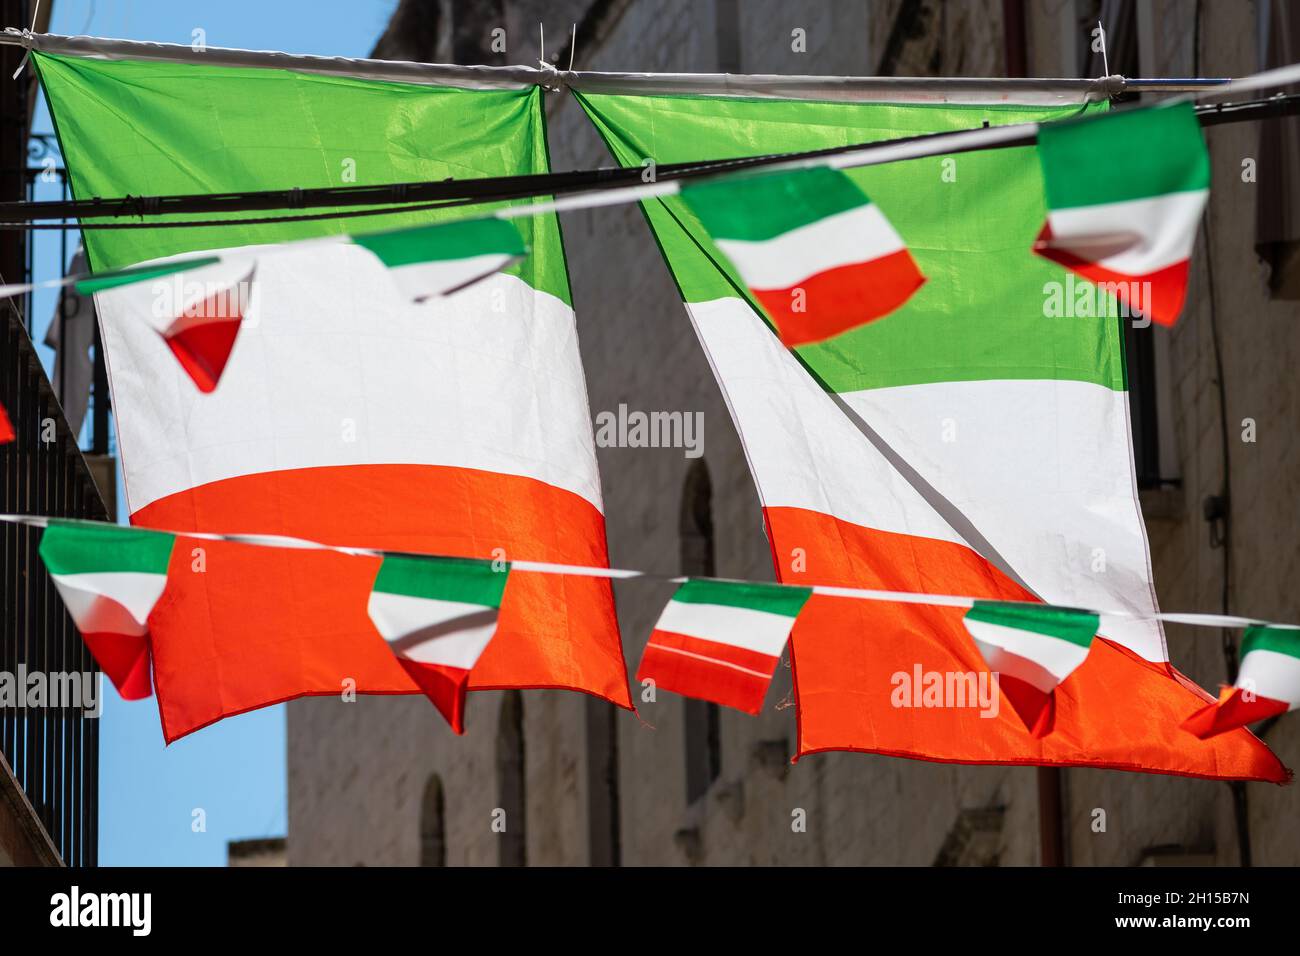 Italian flags and pennants in an old town narrow street of a city in Italy Stock Photo